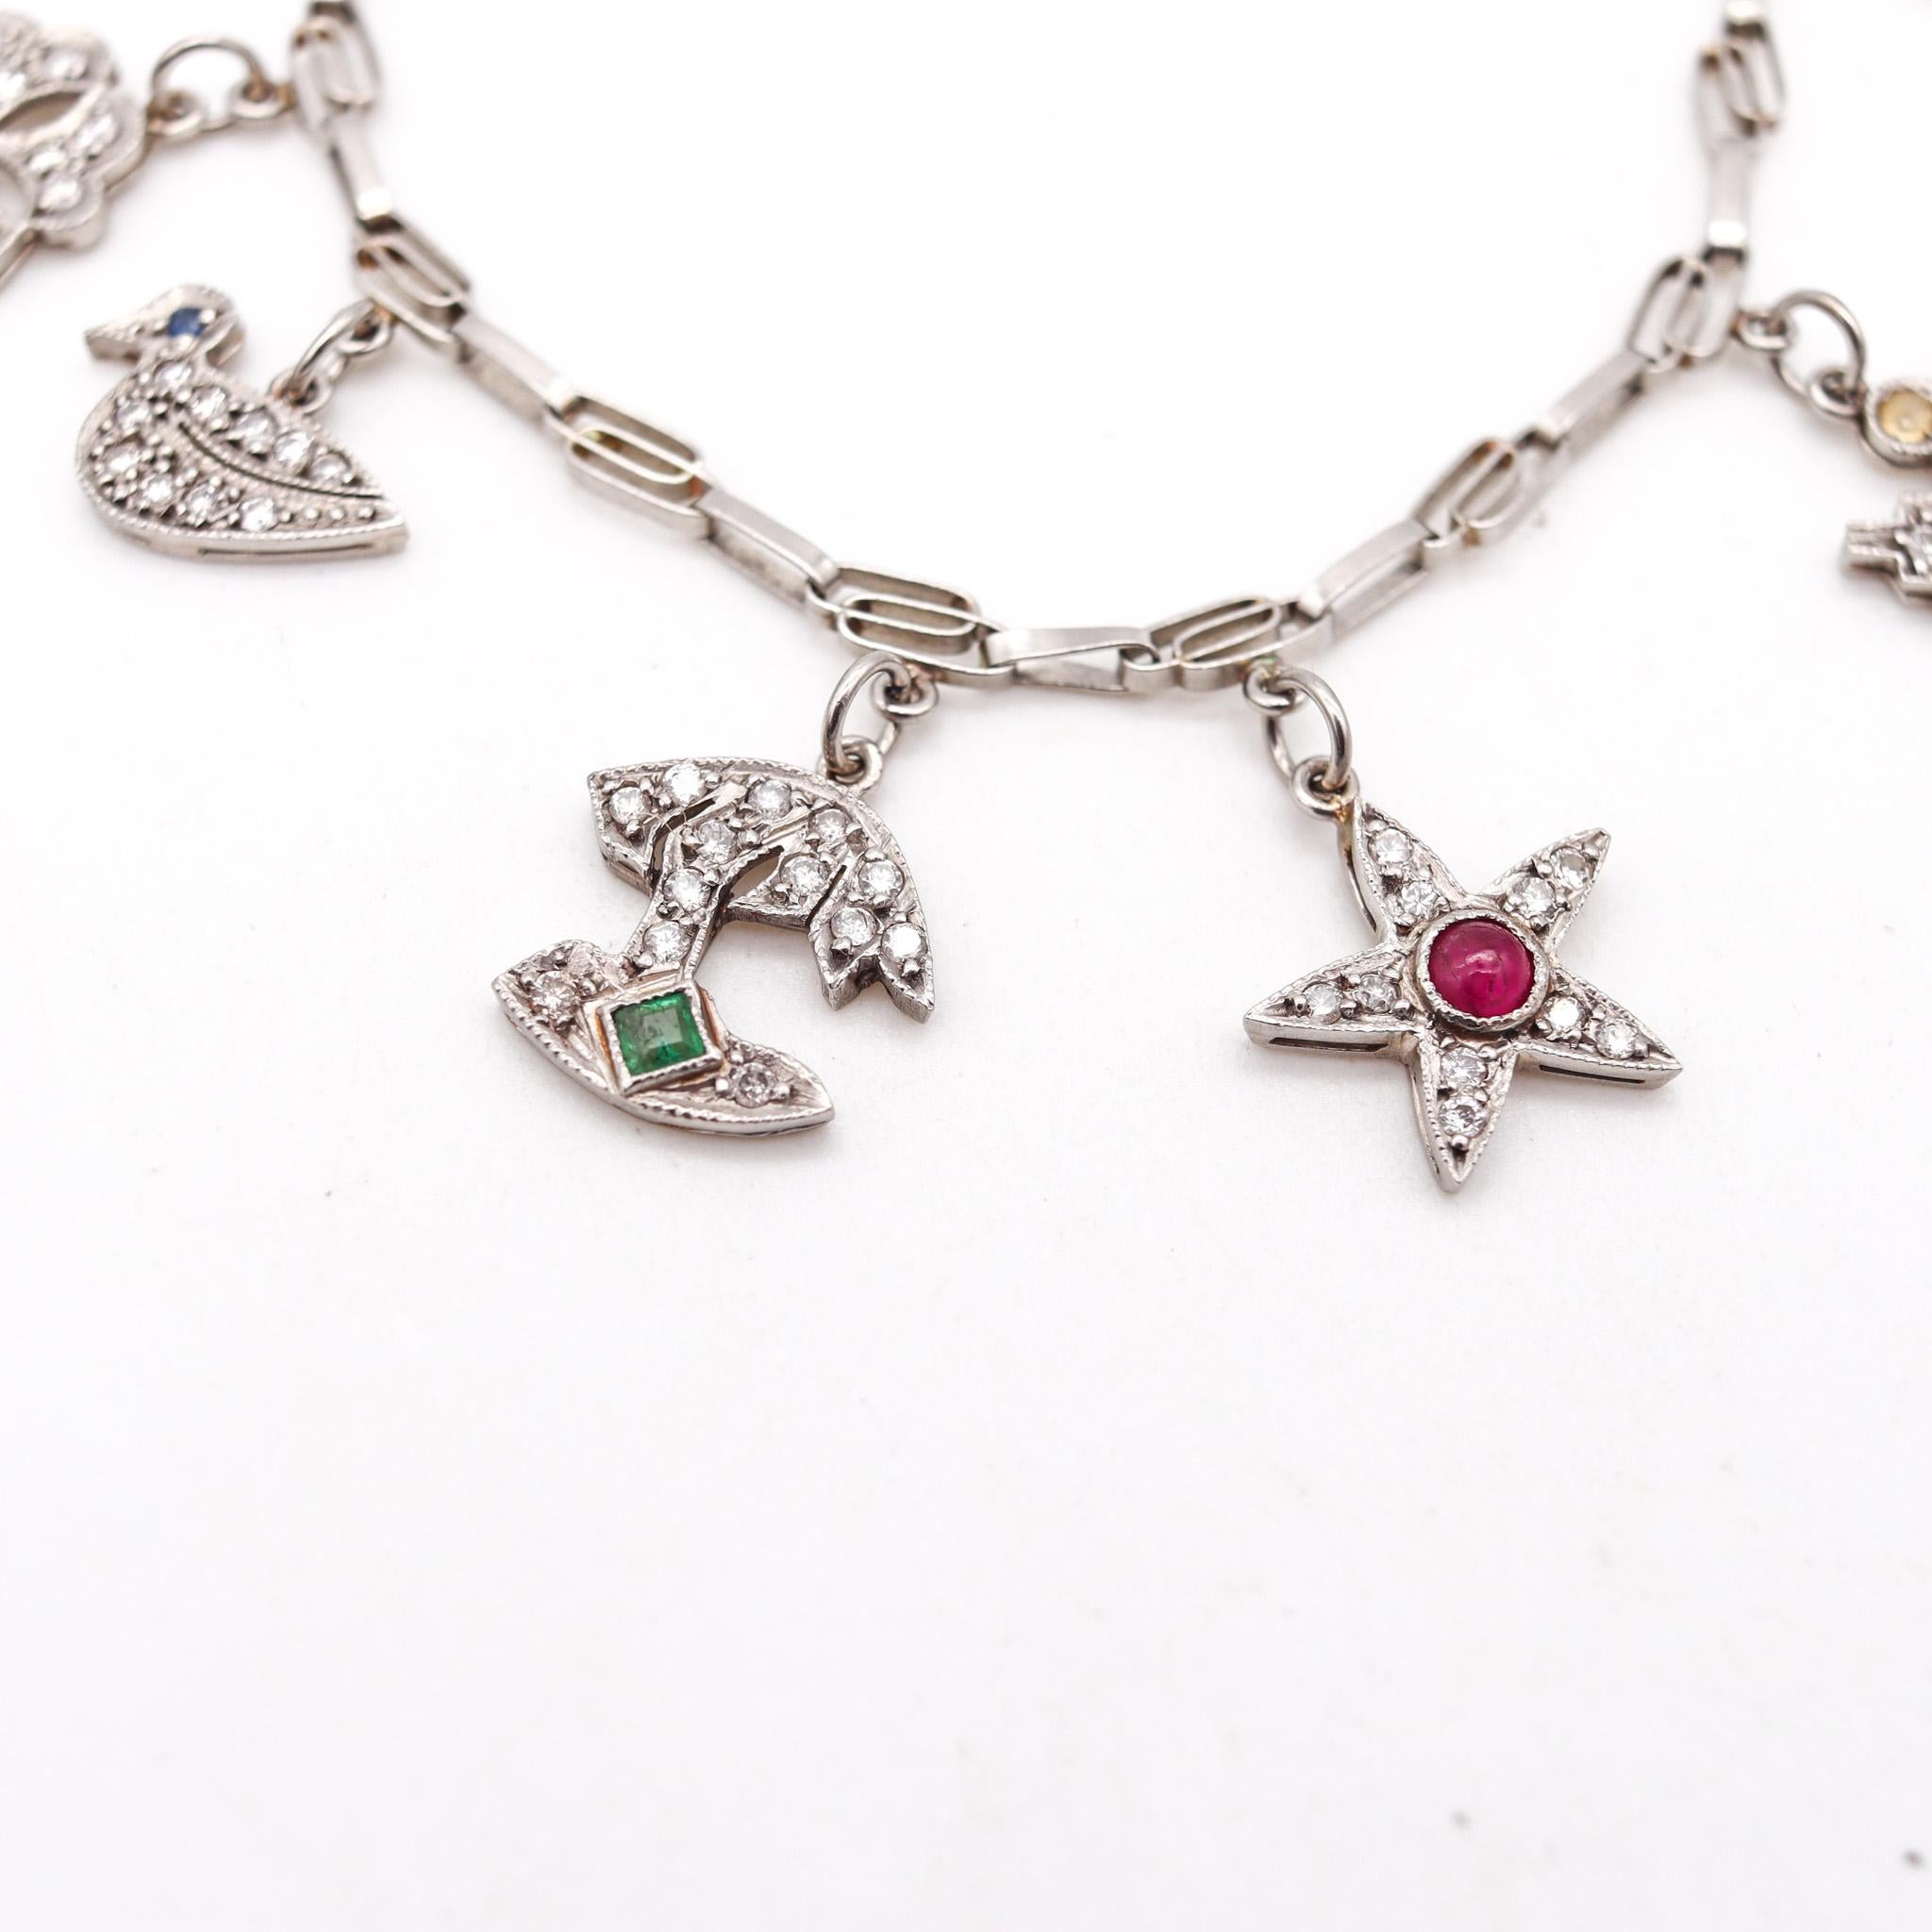 Eleven charms bracelet from the art deco period.

Gorgeous charms bracelet, created during the Art deco period, back in the 1930. It was crafted with beautiful craftsmanship in solid .900/.999 platinum and attached with 11 charms of different